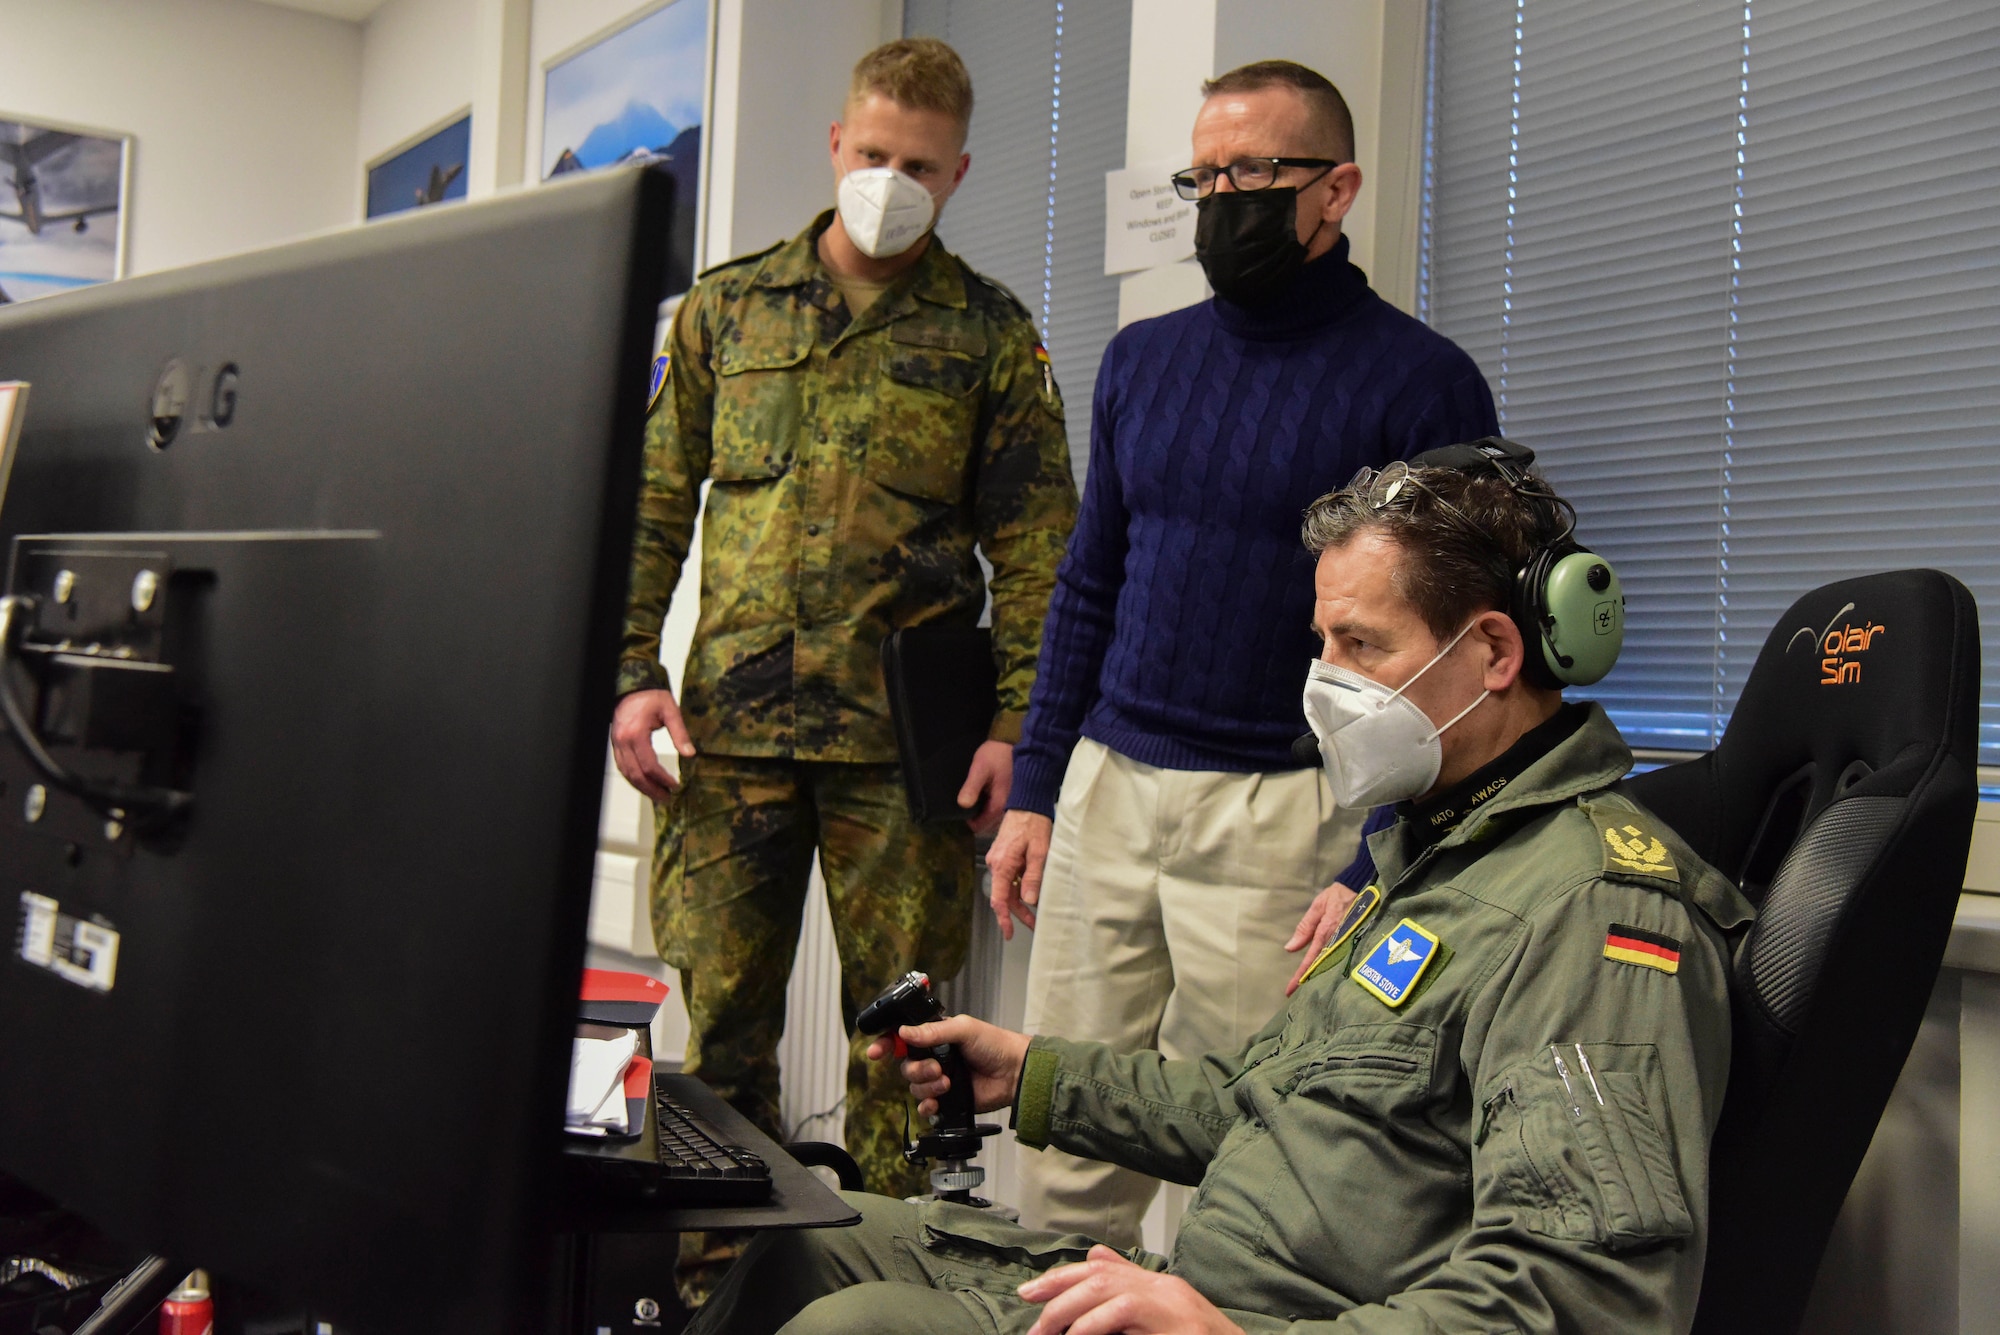 German Maj. Gen. Karsten Stoye, chief of staff at NATO’s Headquarters Allied Air Command, tests the flight simulator during the Spartan Warrior 21-1 exercise at Einsiedlerhof Air Station, Germany, Jan. 25-28, 2021. This semi-annual training is conducted in the European environment and can encompass all phases of major combat operations.